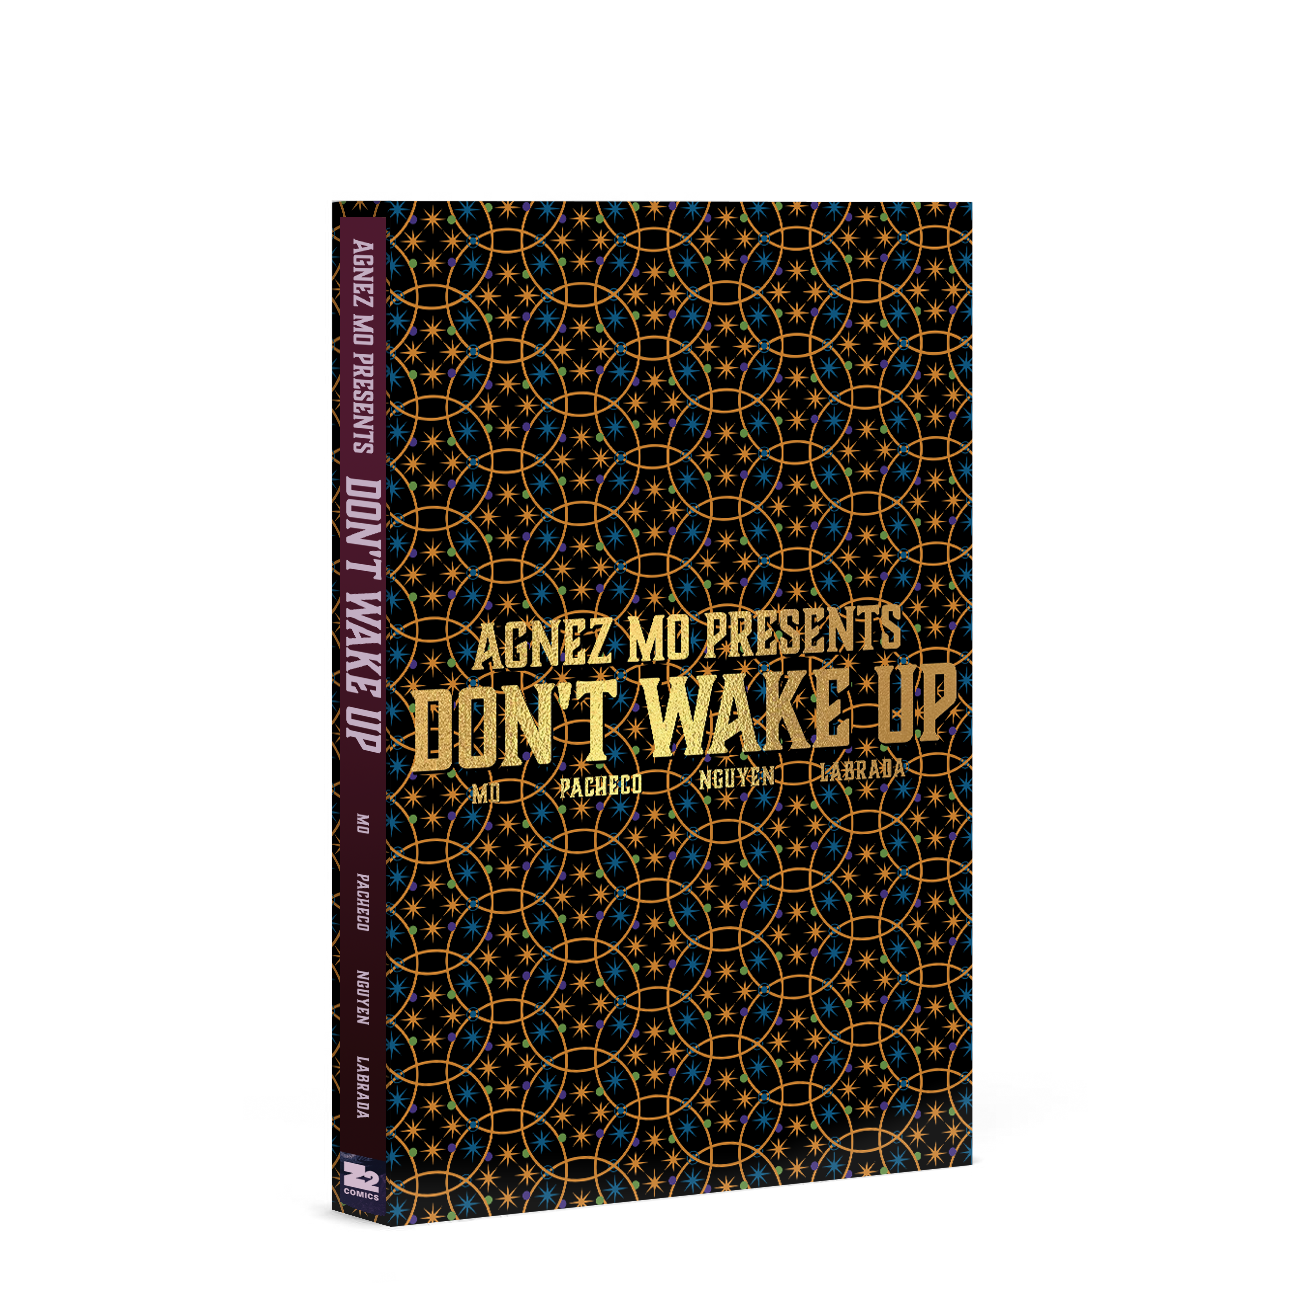 Agnez Mo Presents: Don't Wake Up (6571605360780)